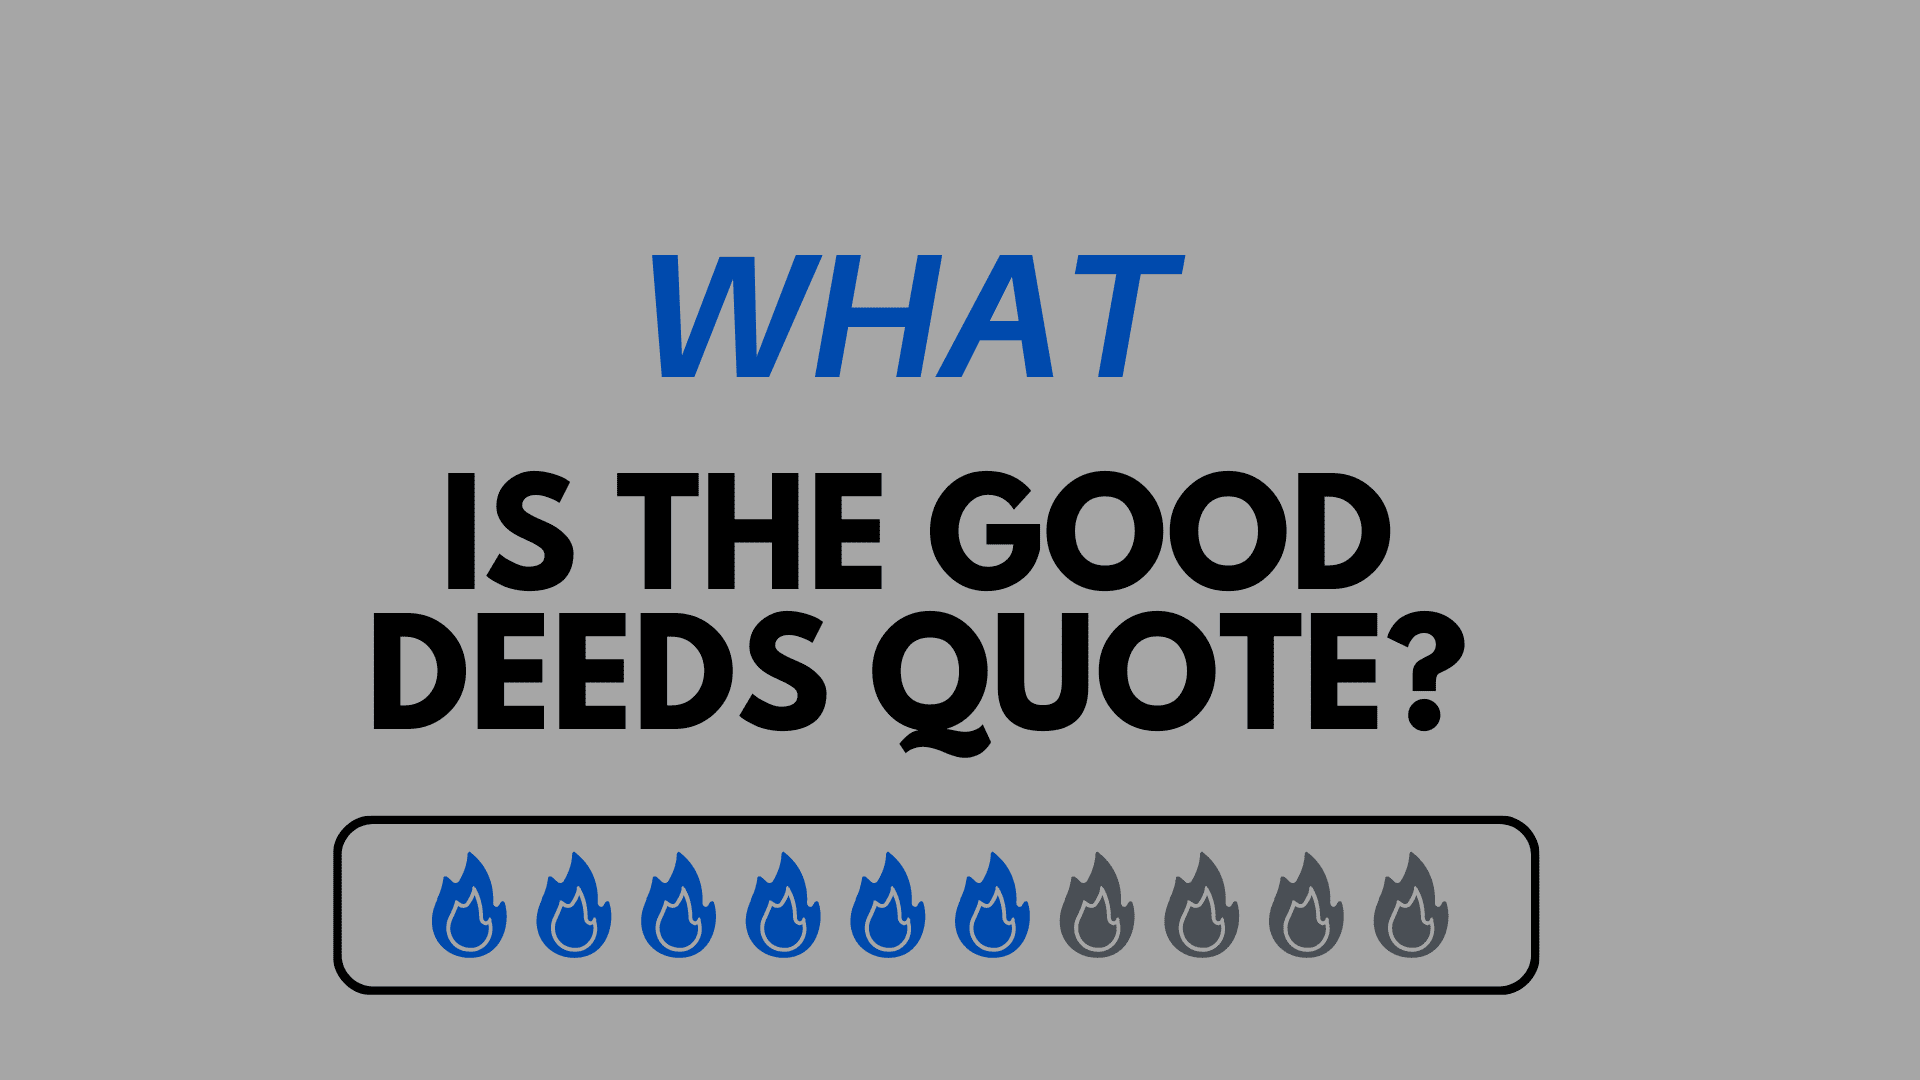 What are good deeds, good words and good thoughts?